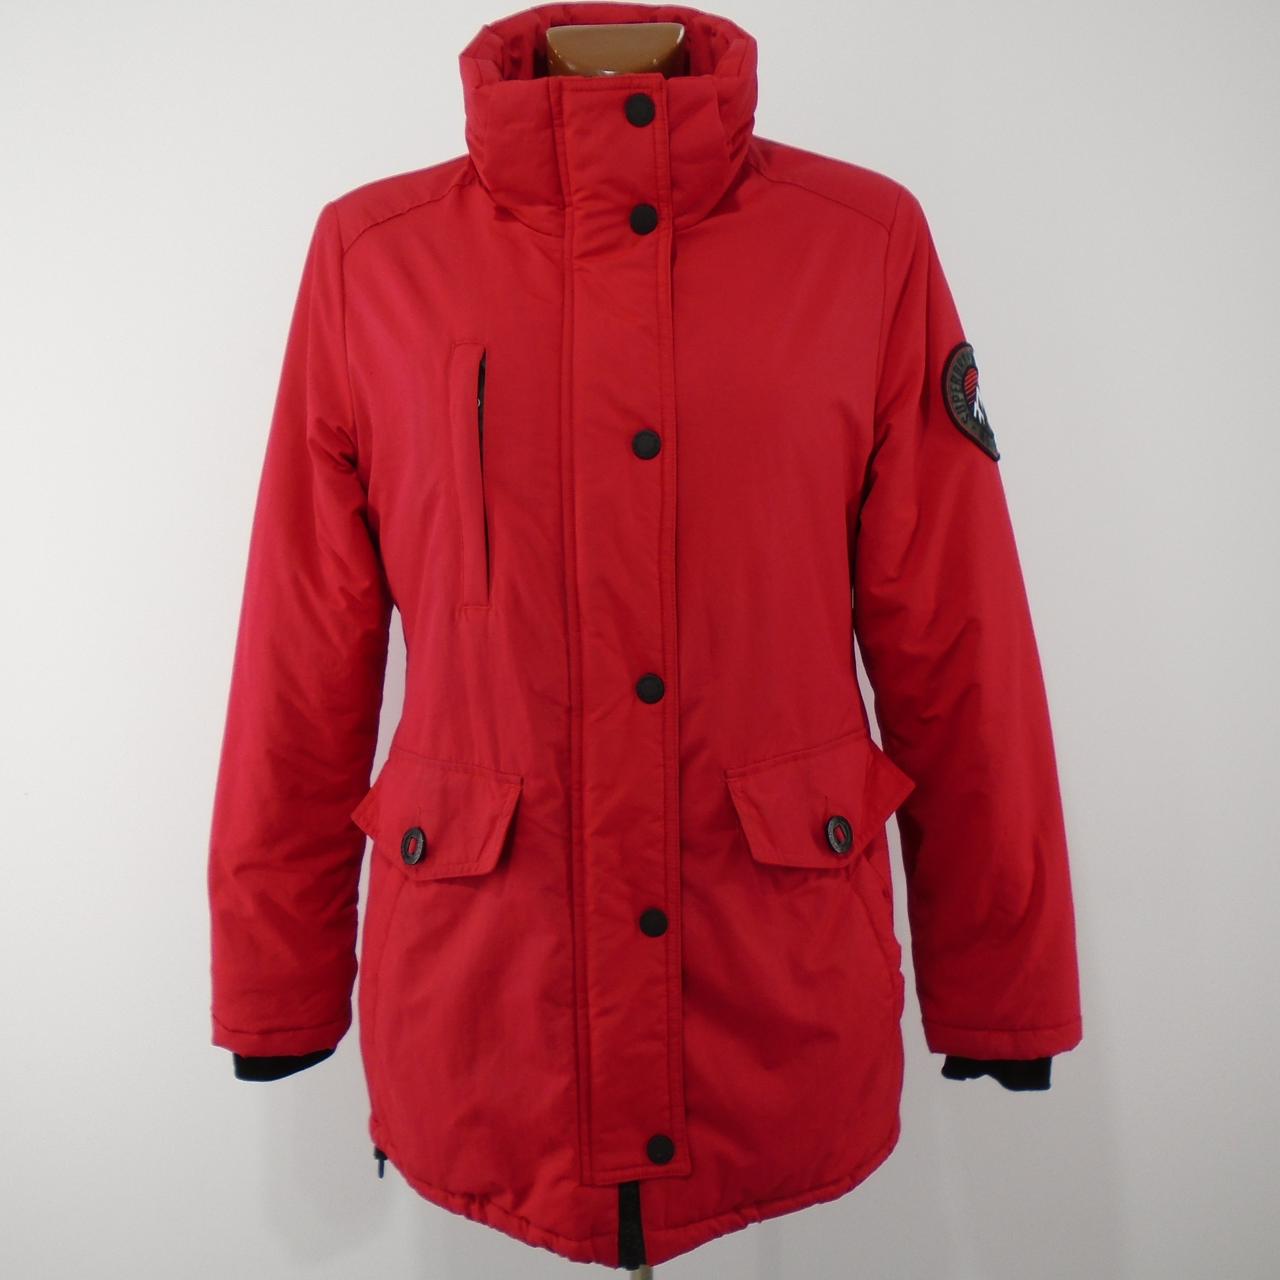 Women's Parka Superdry. Red. M. Used. Satisfactory